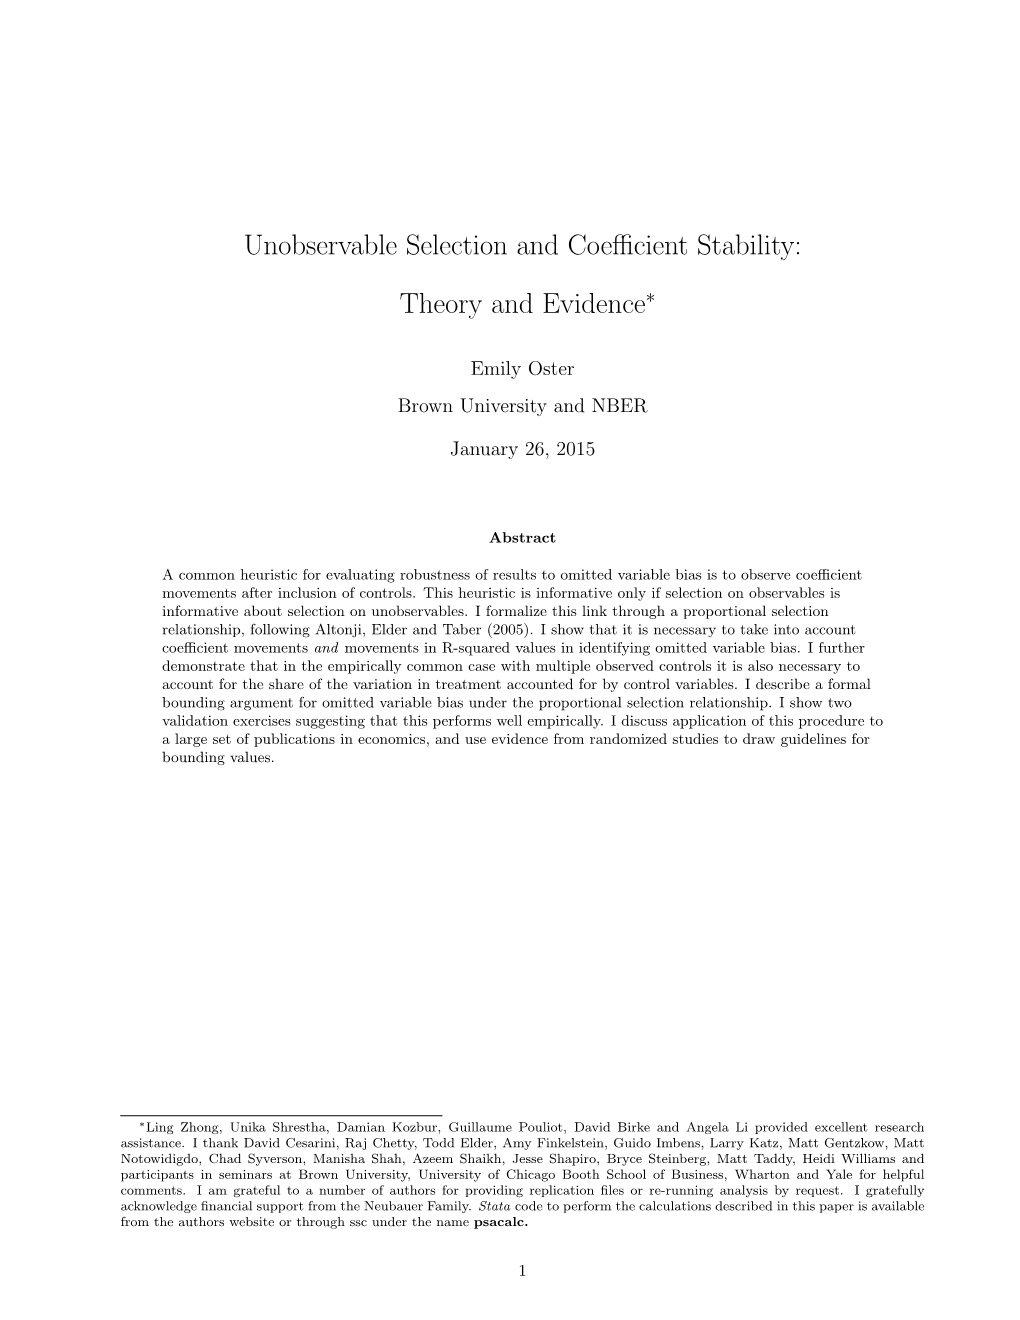 Unobservable Selection and Coefficient Stability: Theory and Evidence